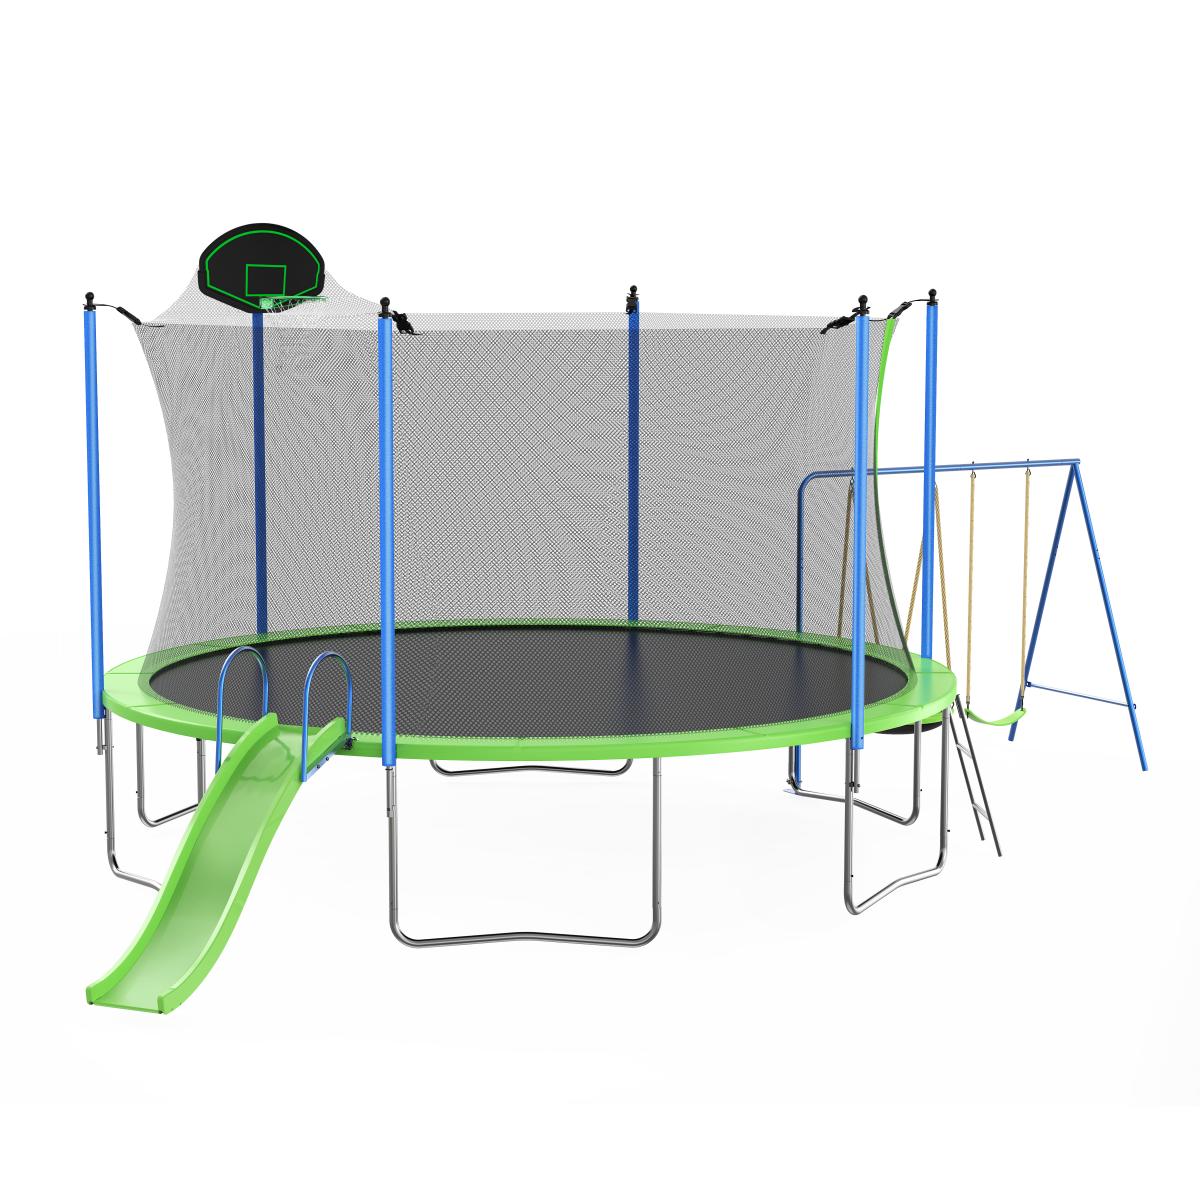 12FT Trampoline with Slide and Swings, Astm Approved Large Recreational Trampoline with Basketball Hoop and Ladder,Outdoor Backyard Trampoline with Net, Capacity for Kids and Adults